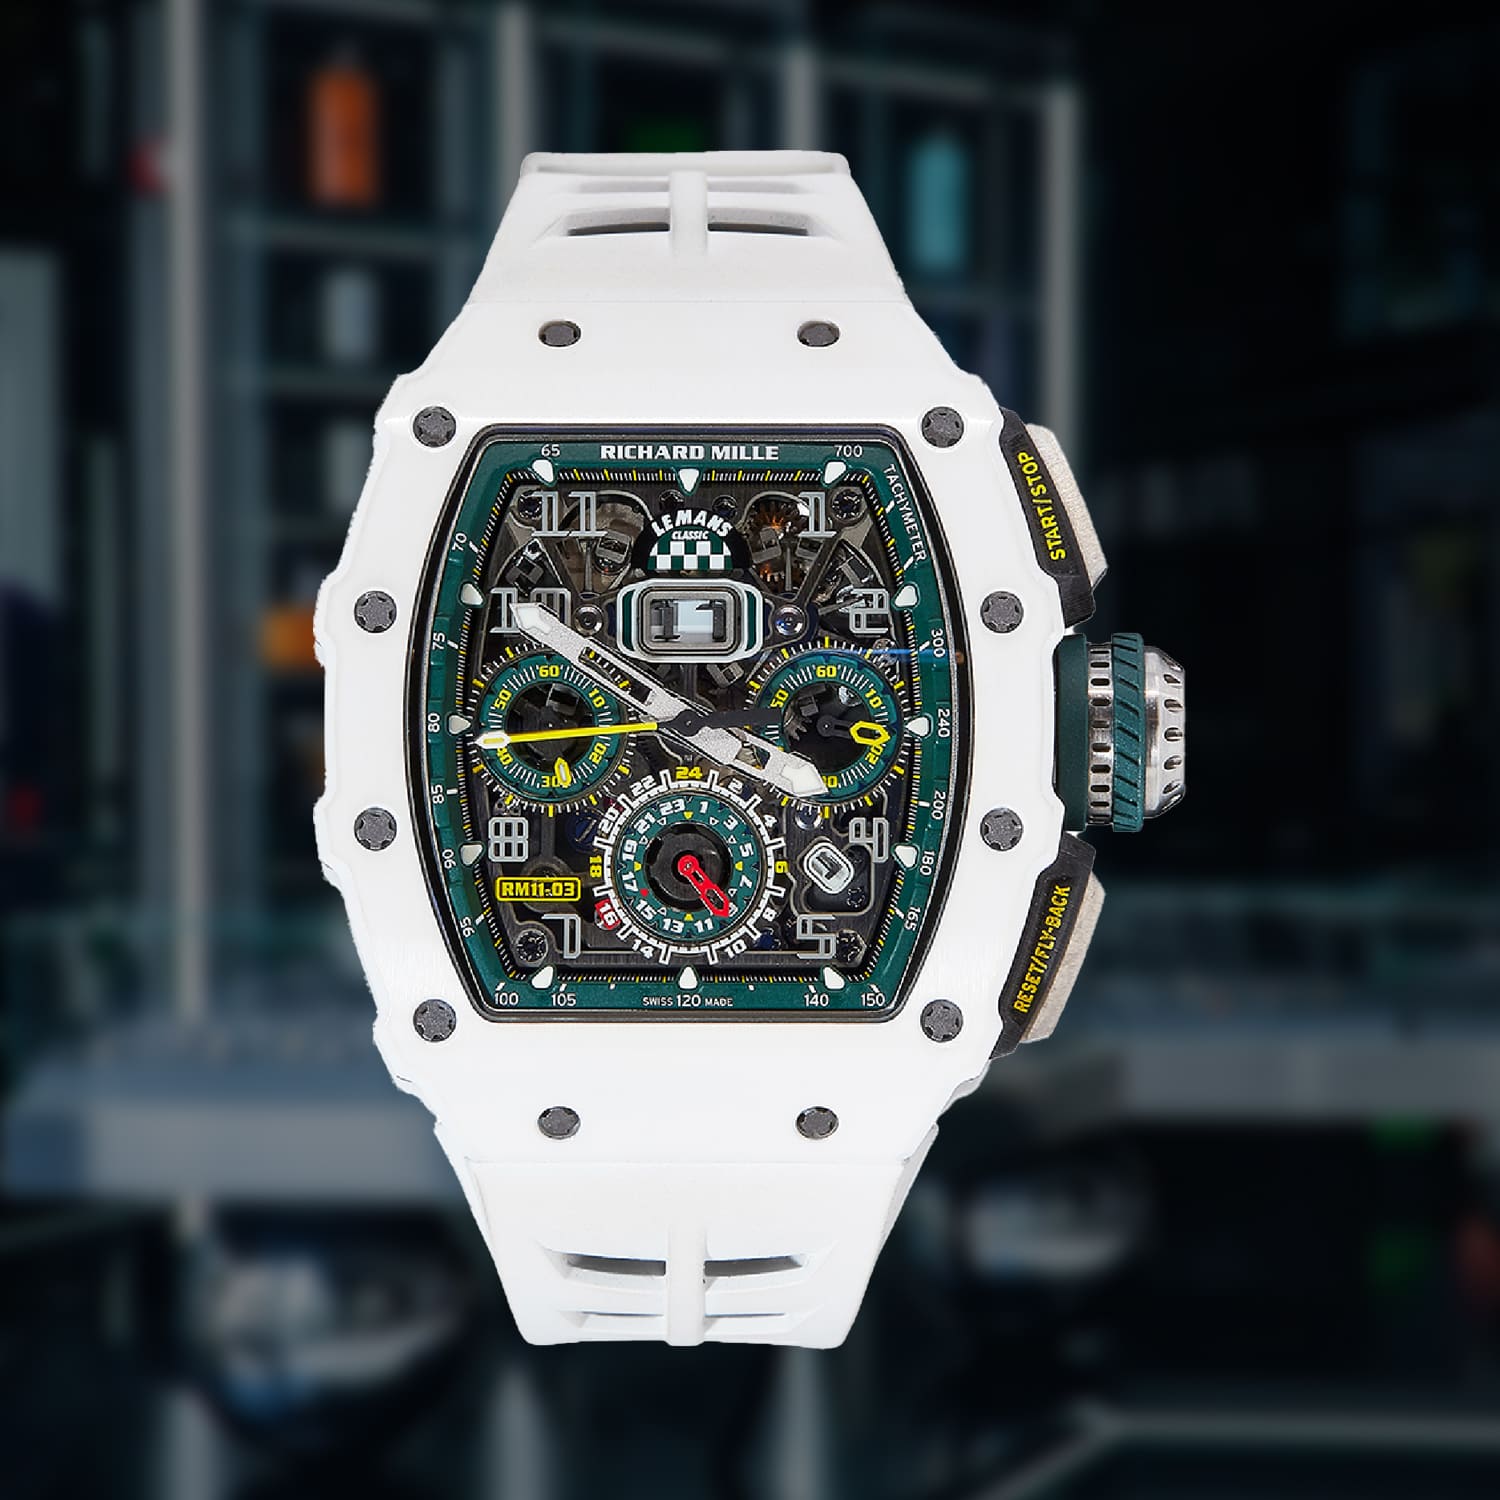 Richard Mille RM11-03 Le Mans Classic White | The Watch Meister